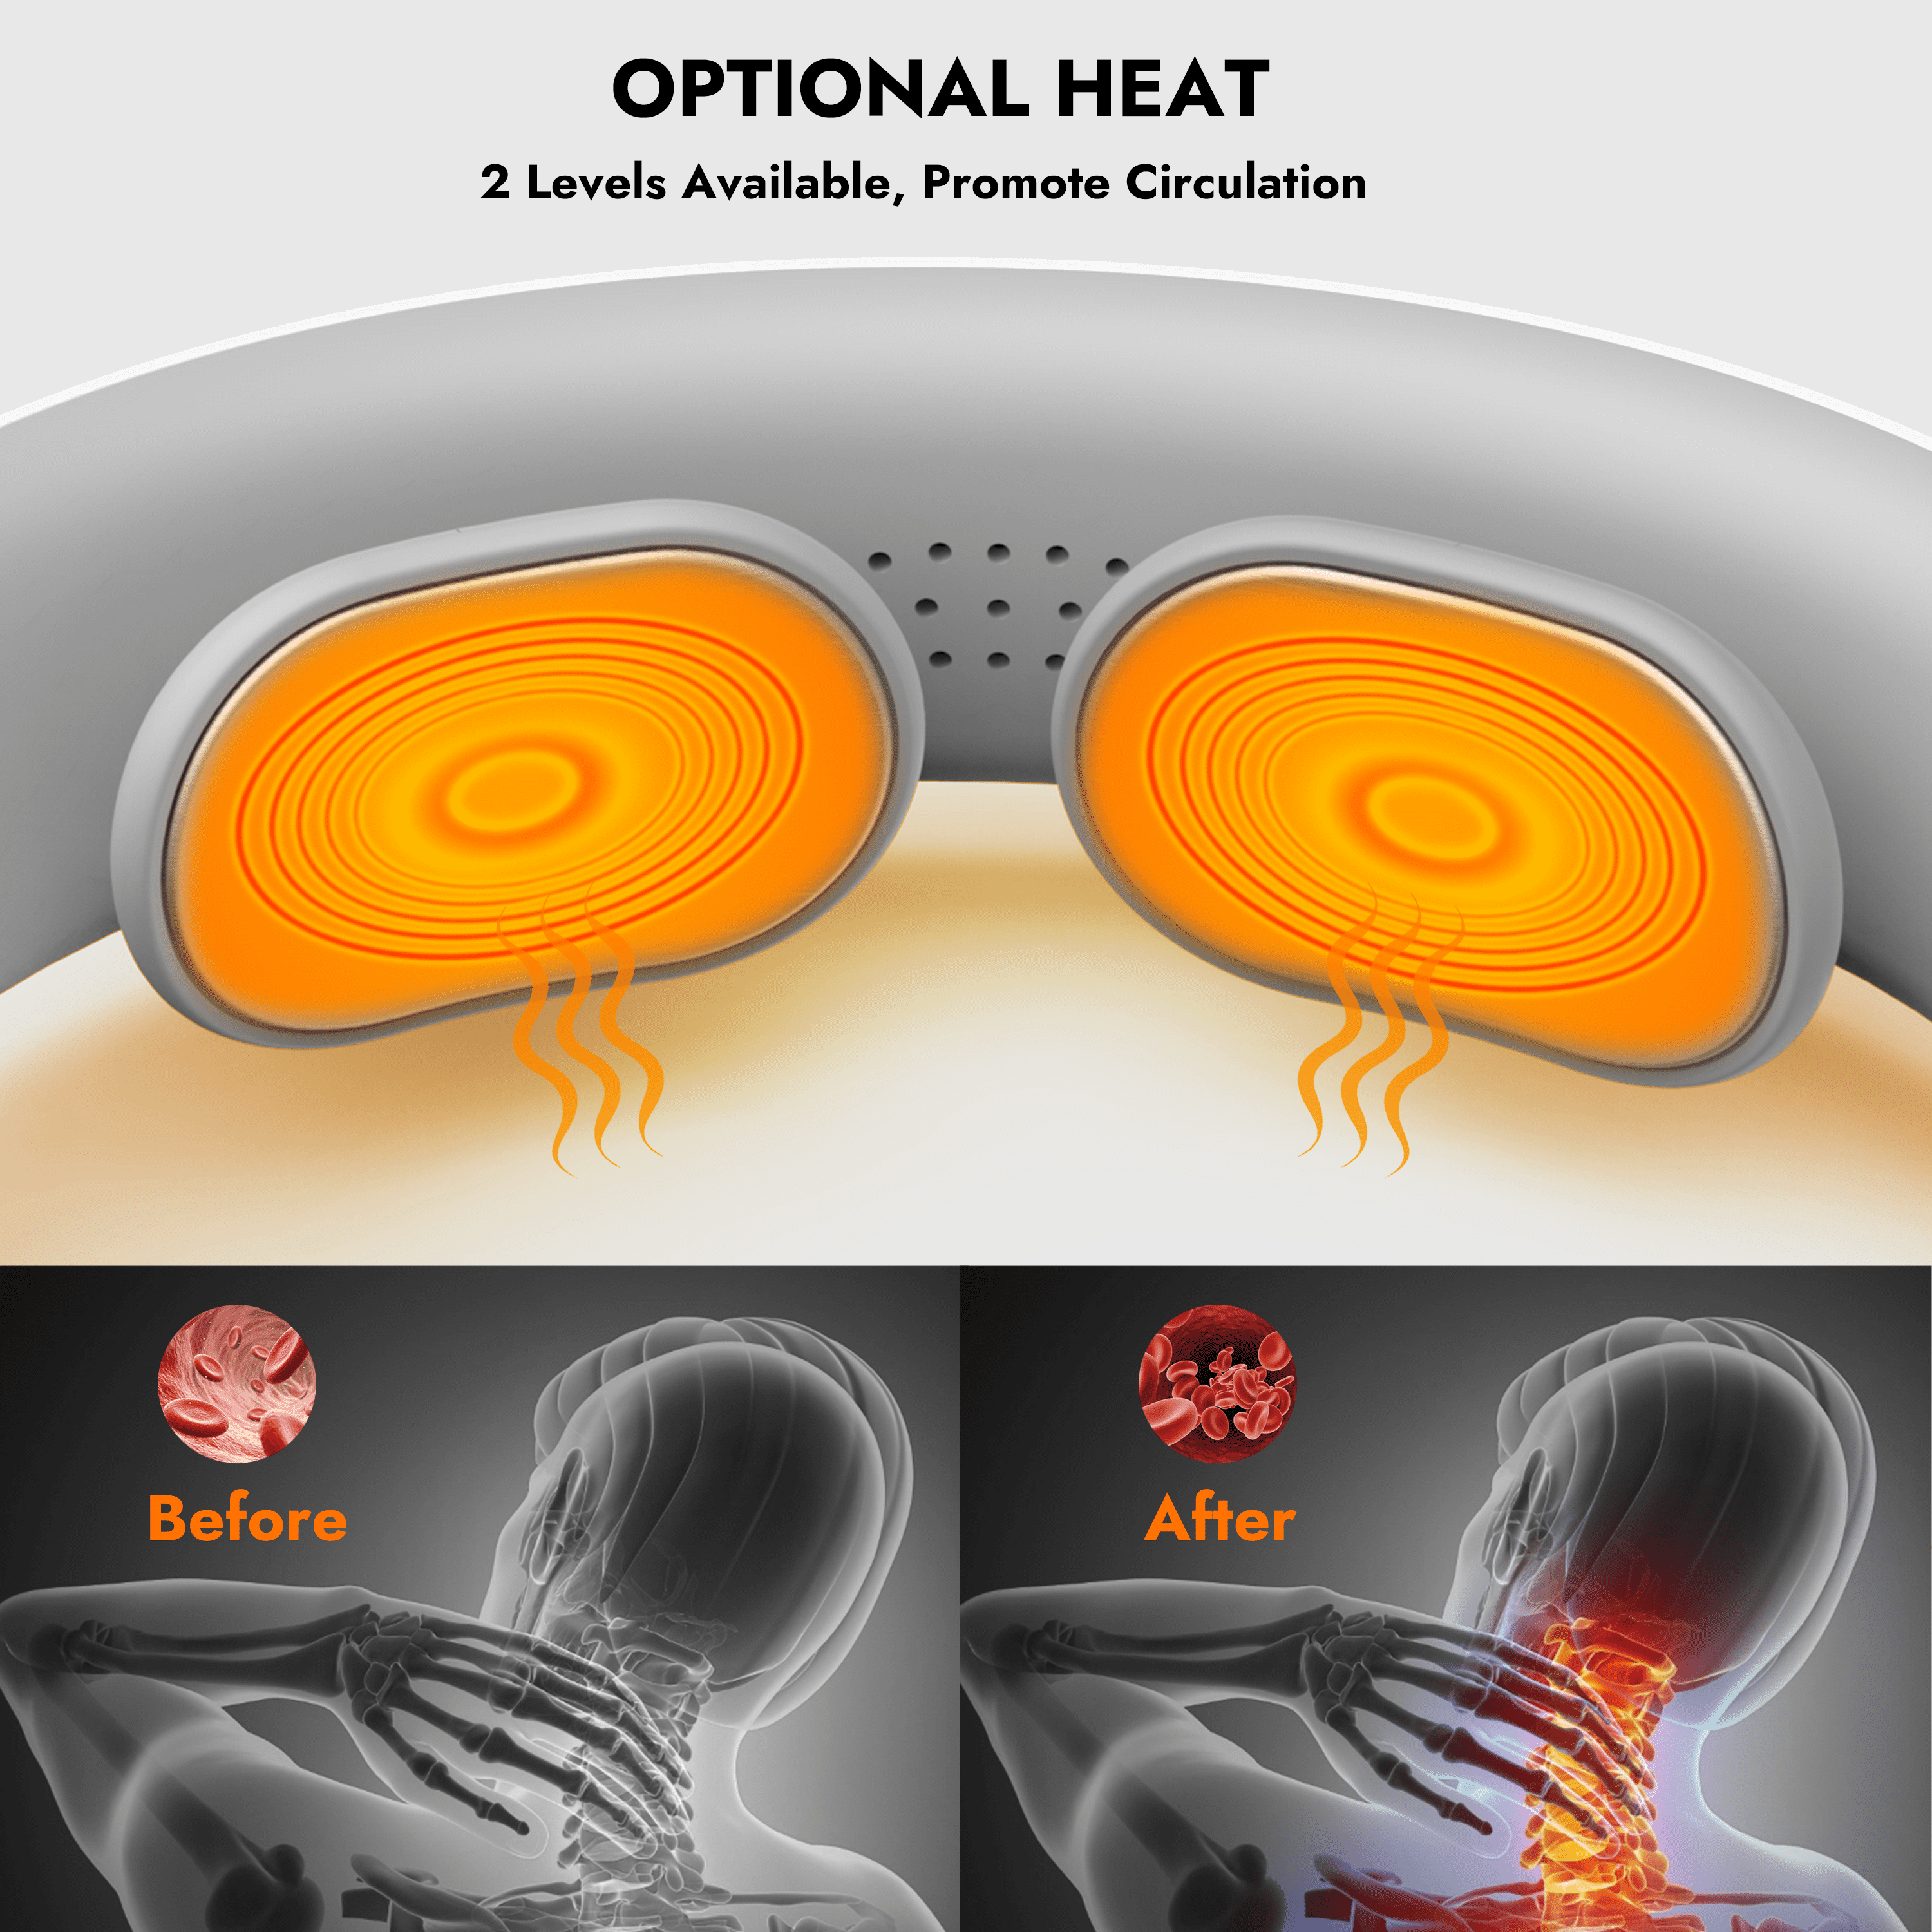 FIT KING Neck Massager with Heat,Fatigue and Pain Relief,TENS Intelligent Neck  Massager Cordless and